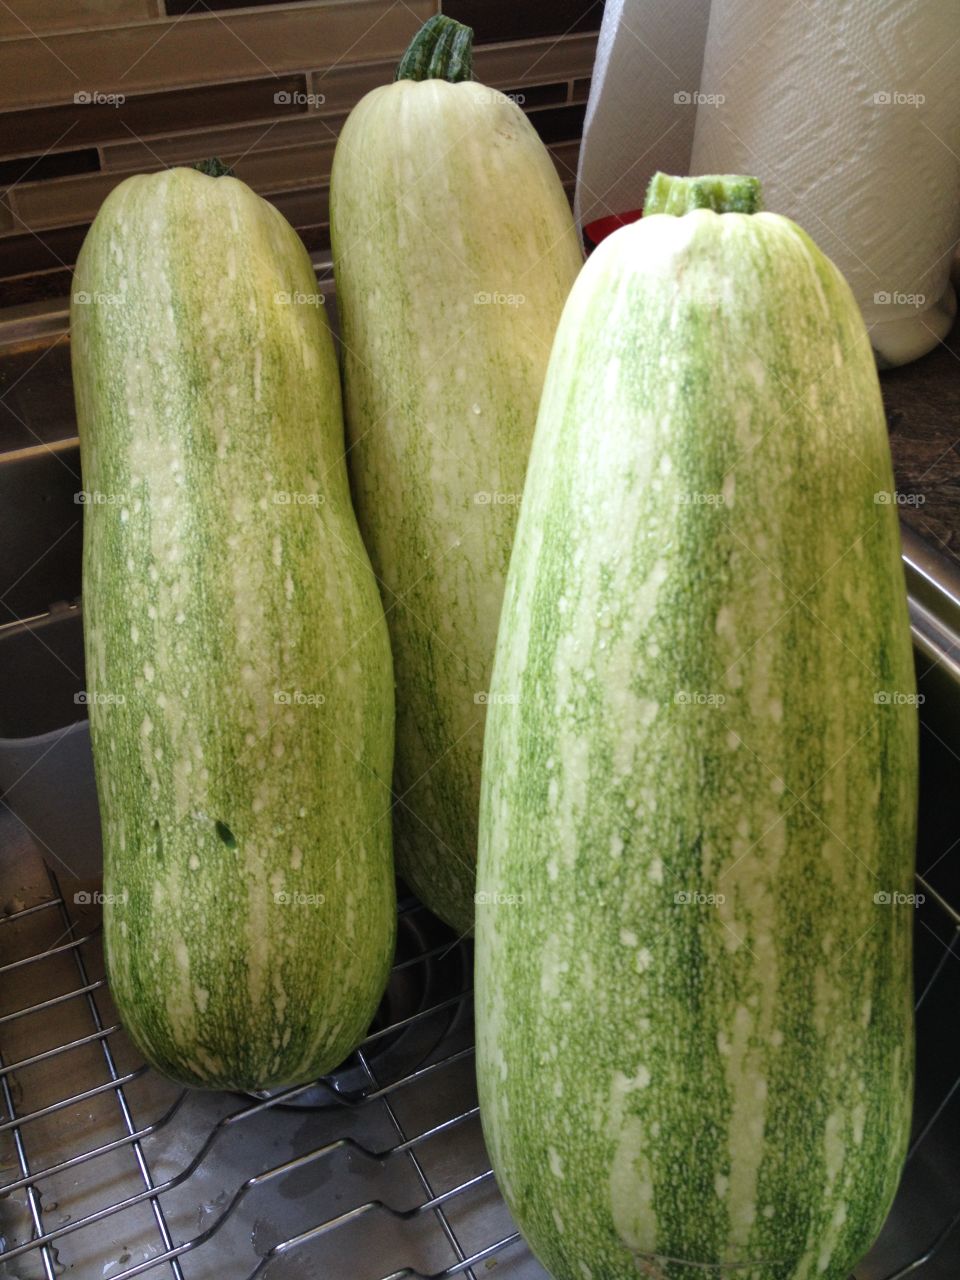 Mega Zucchinis. Huge Zucchinis from the garden